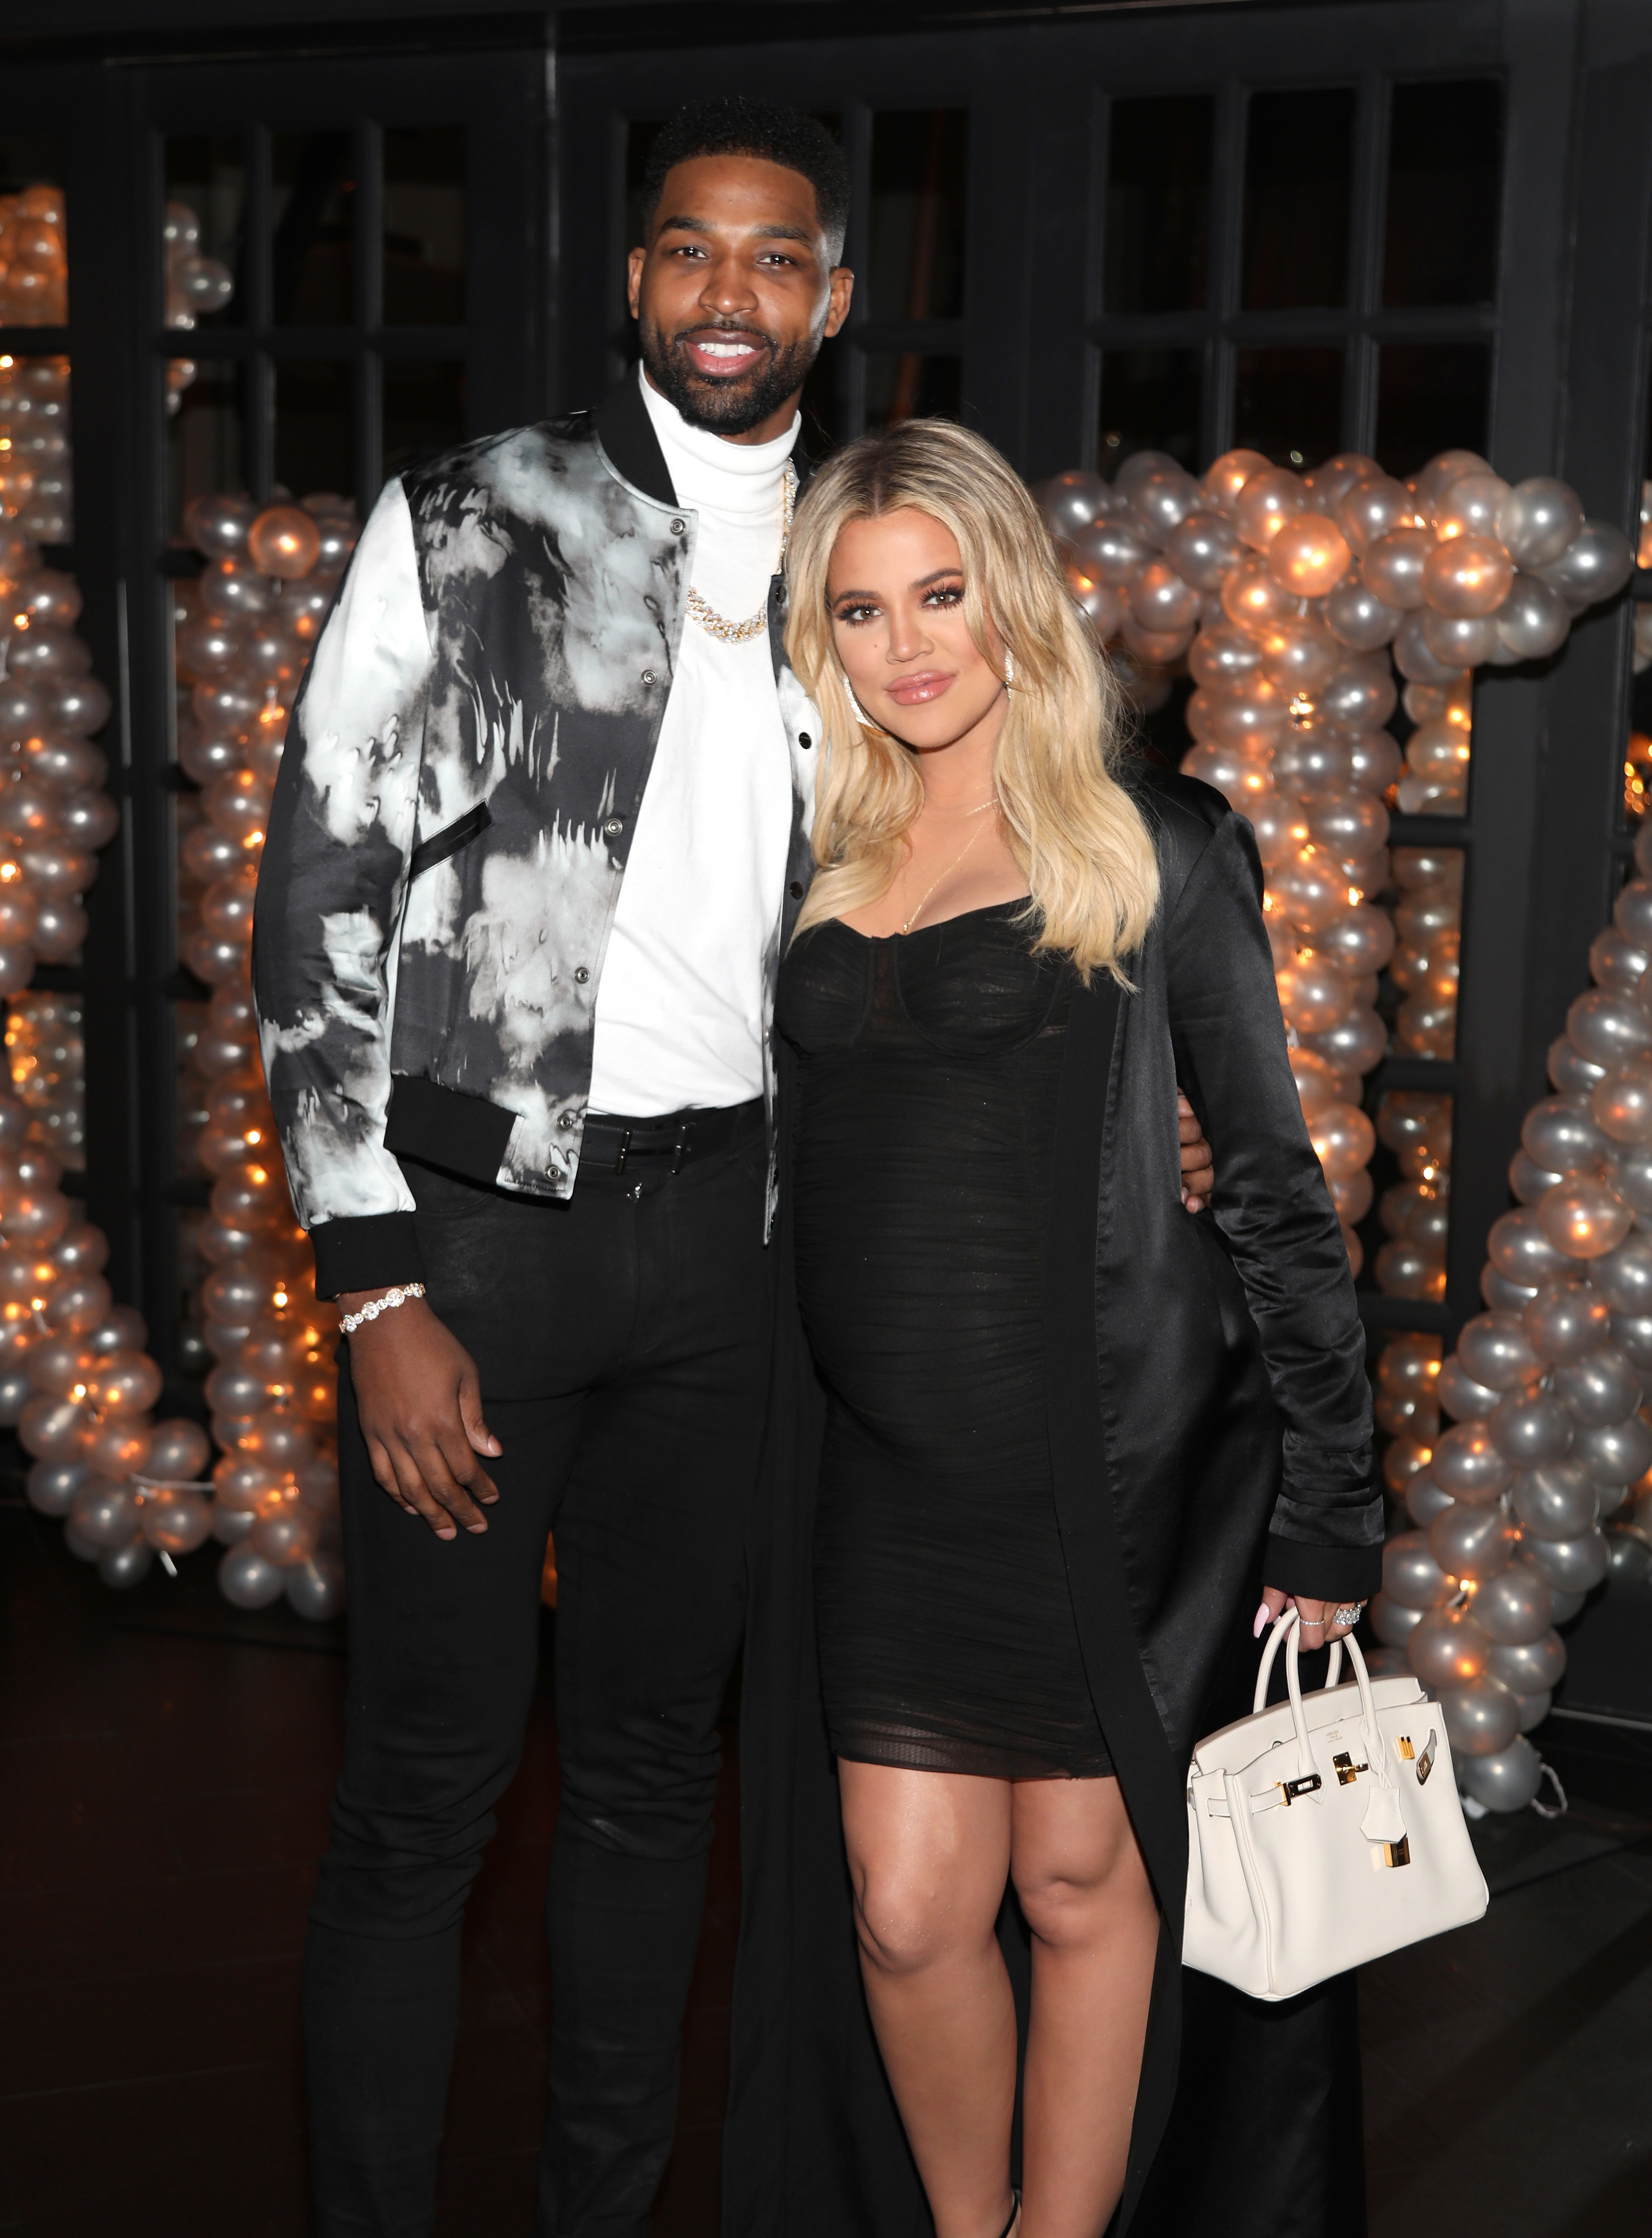 Khloe Kardashian shows over-the-top birthday gifts from friends and family-  but nothing from baby daddy Tristan Thompson